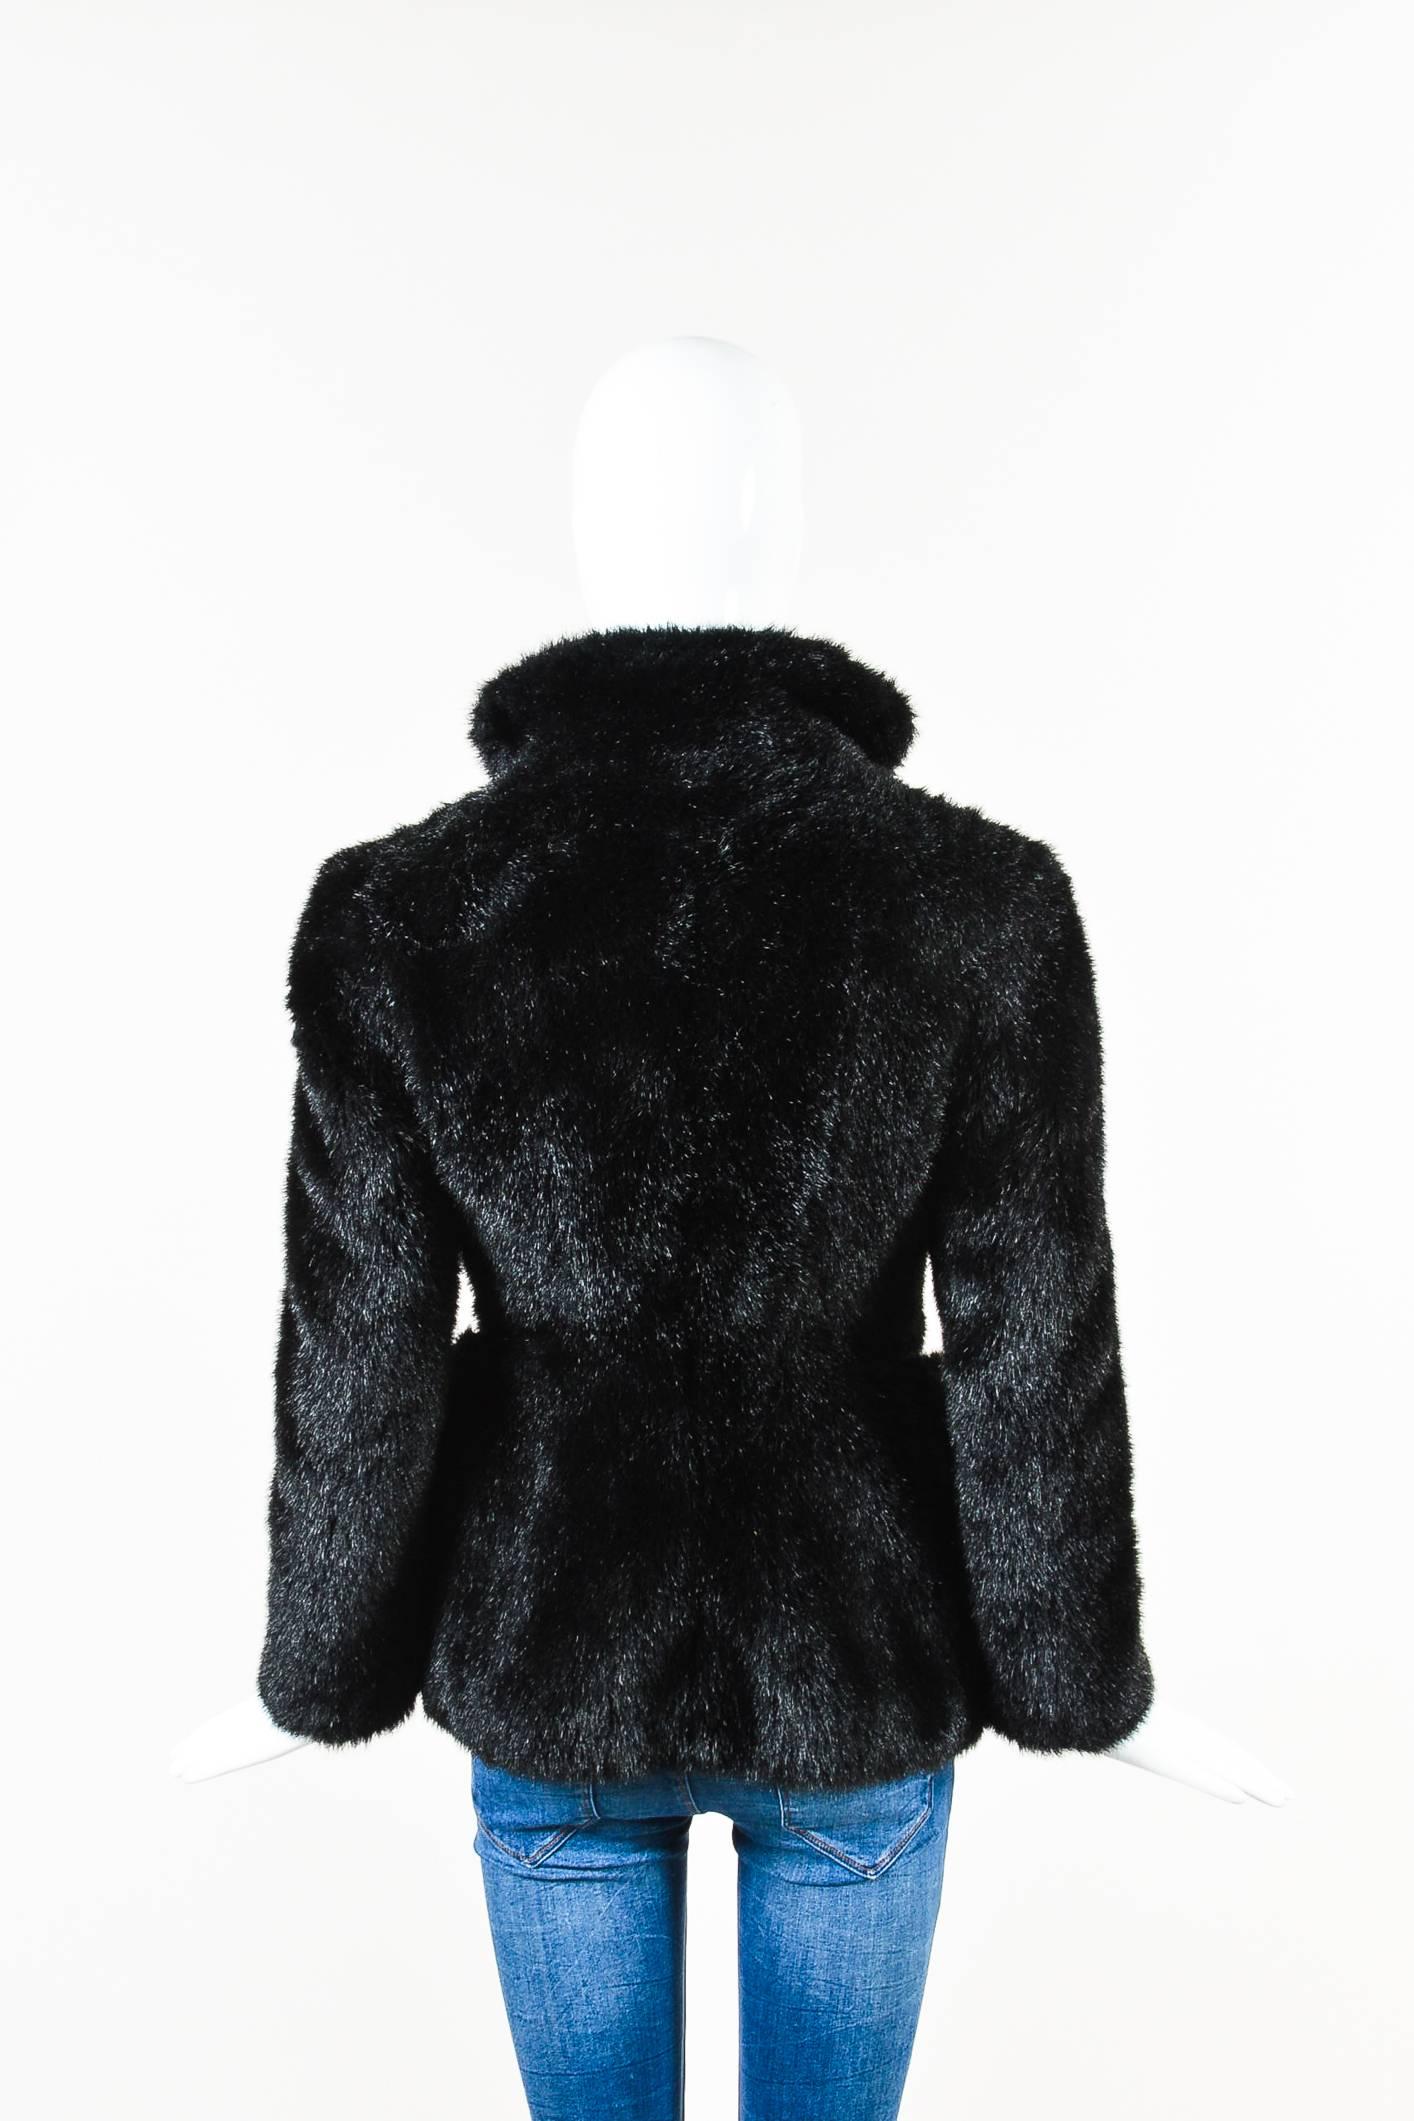 Boxy jacket constructed of soft faux fur features clear PVC panels at sides. Single button closure at front. Bracelet length sleeves. Lined.